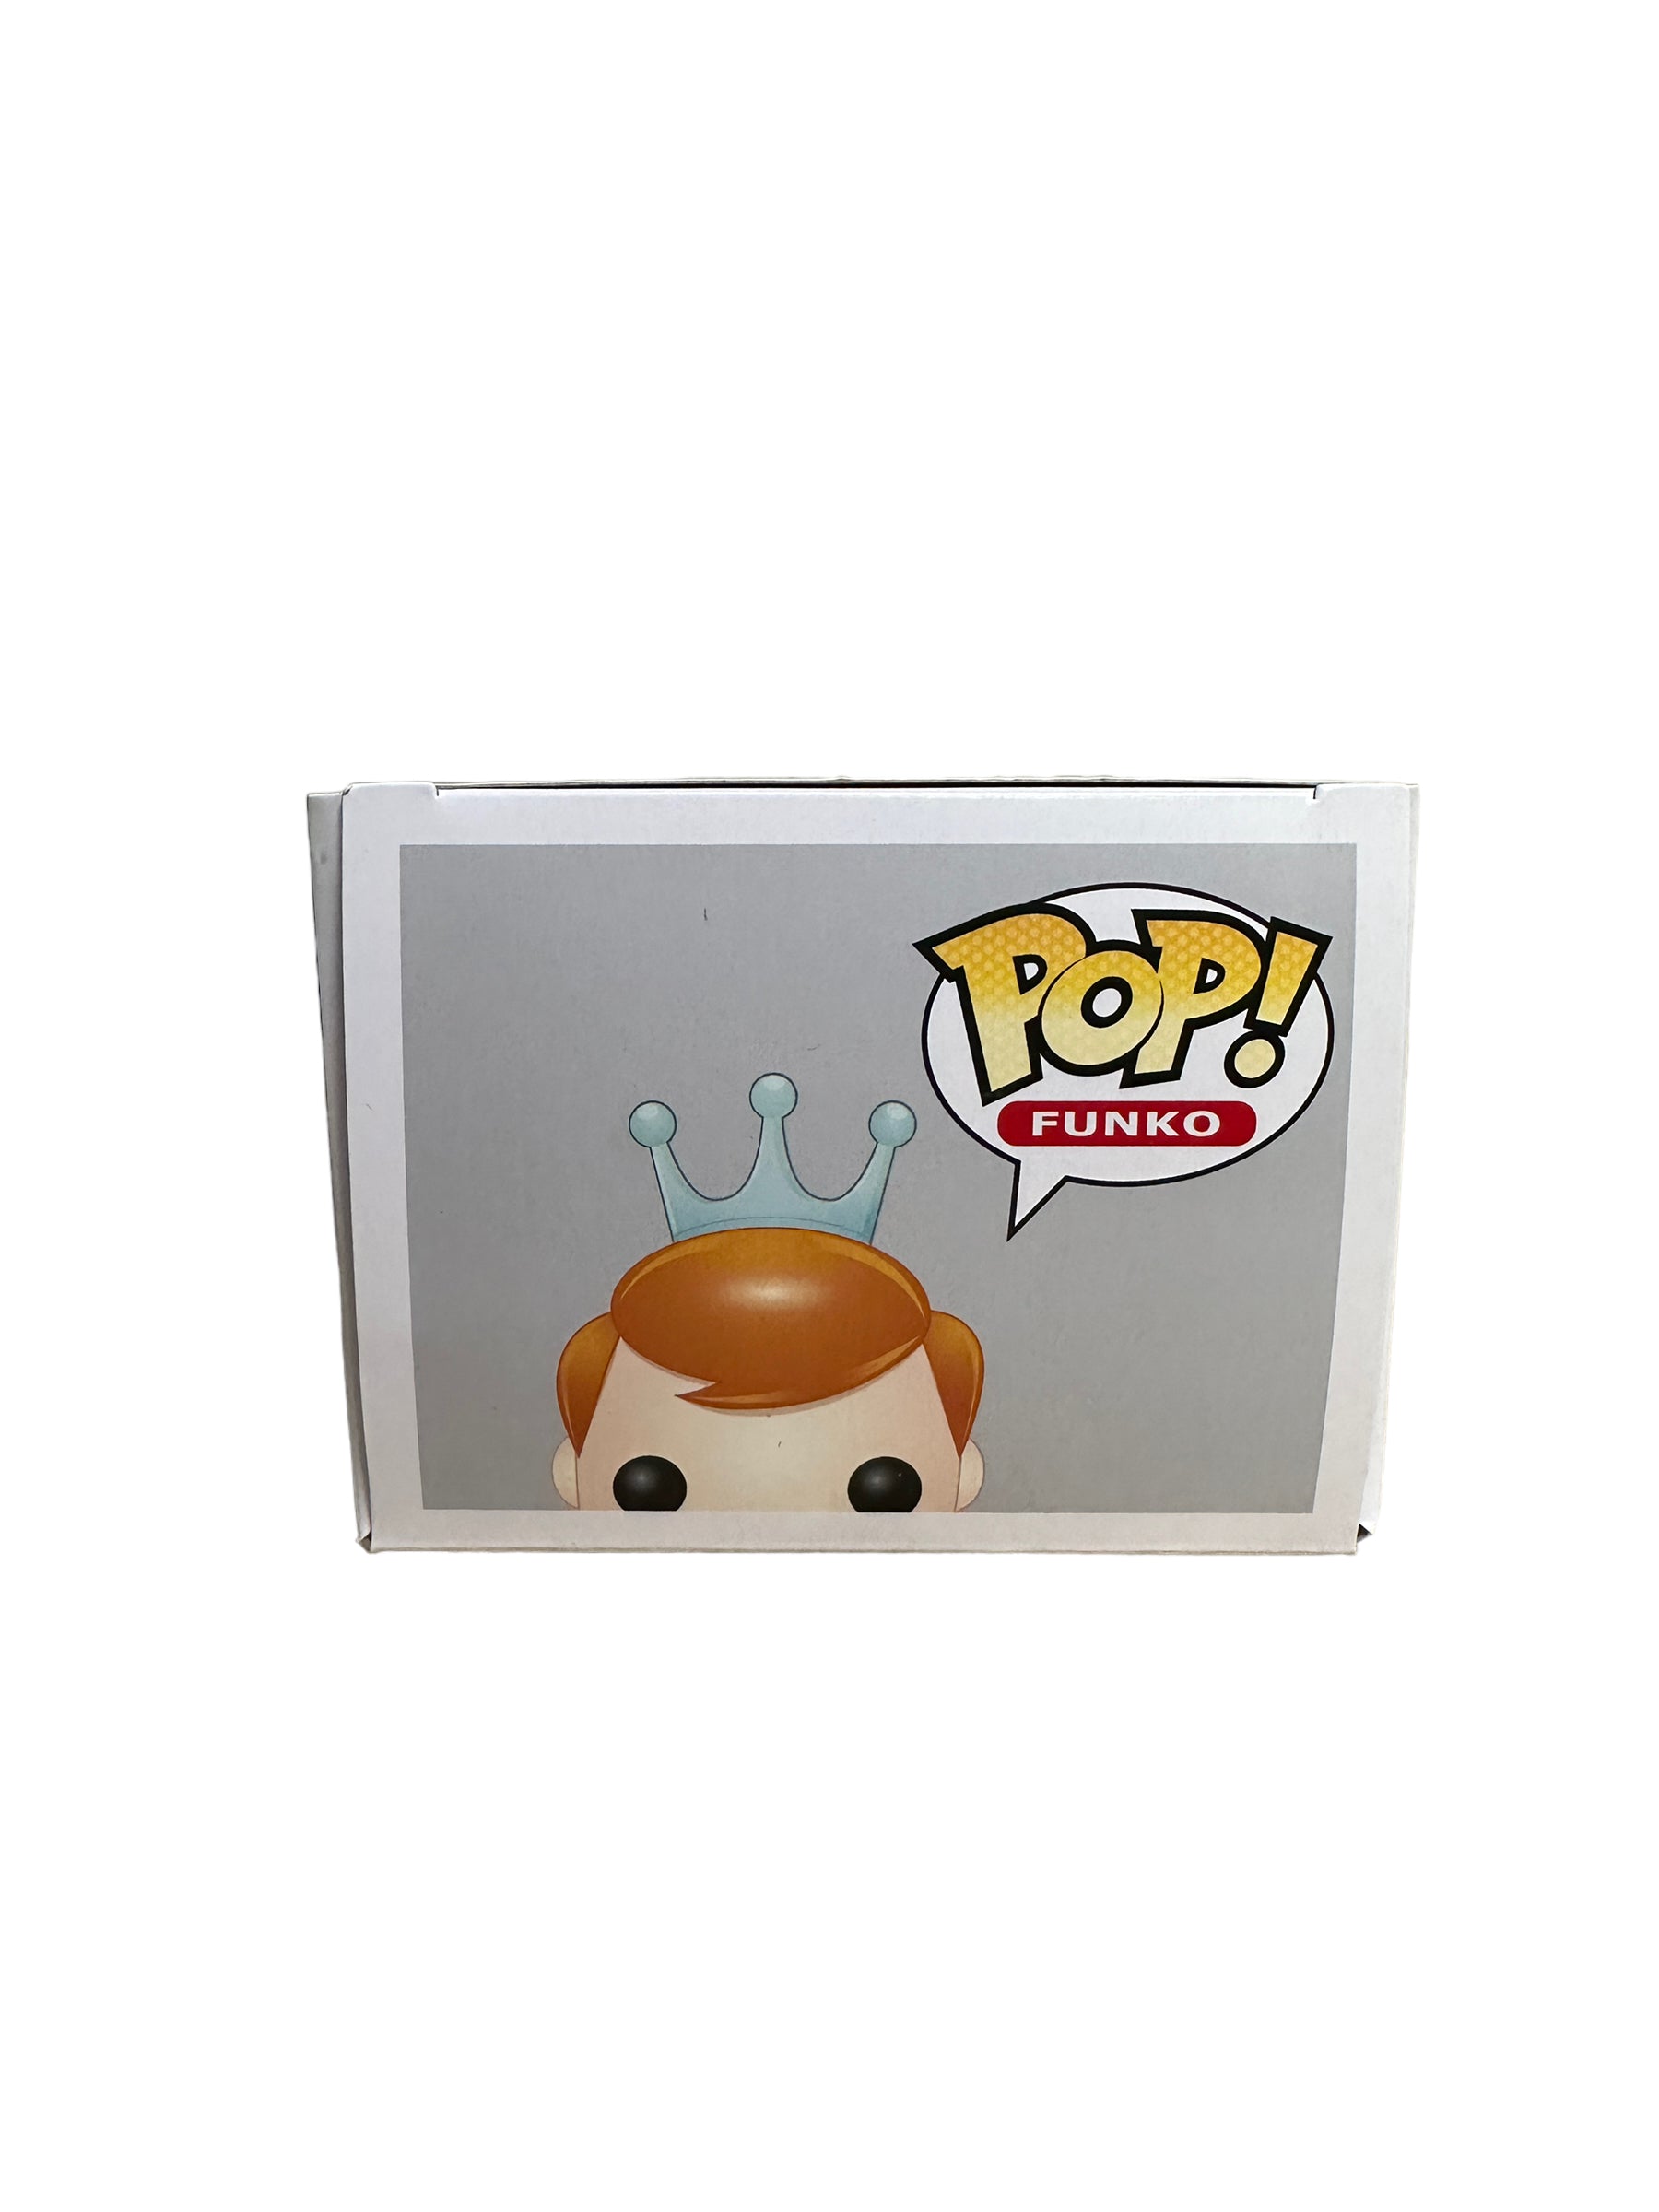 Freddy Funko as Mad Hatter #43 Funko Pop! - SDCC 2016 Exclusive LE400 Pcs - Condition 8/10